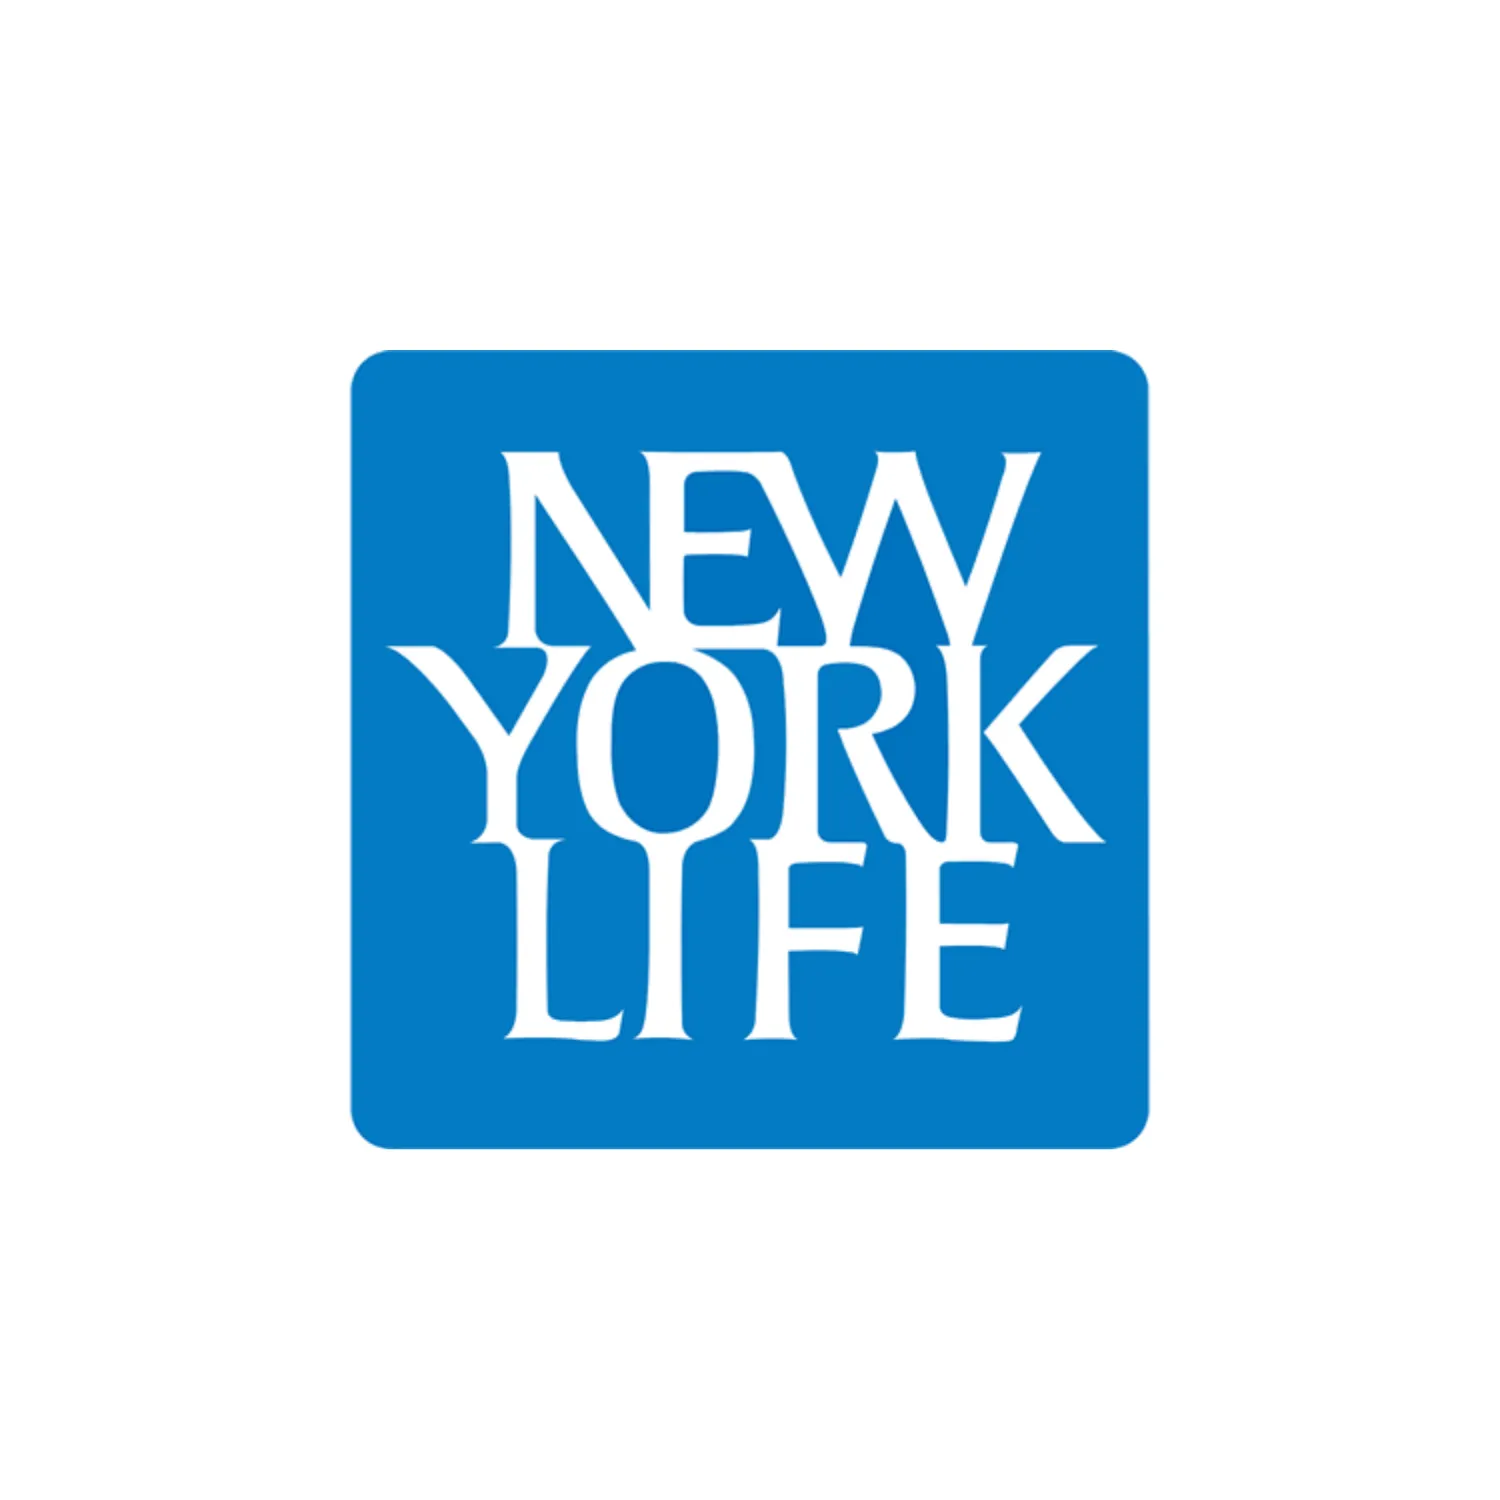 Database of New York Life Insurance Company Agents Locations in the United States